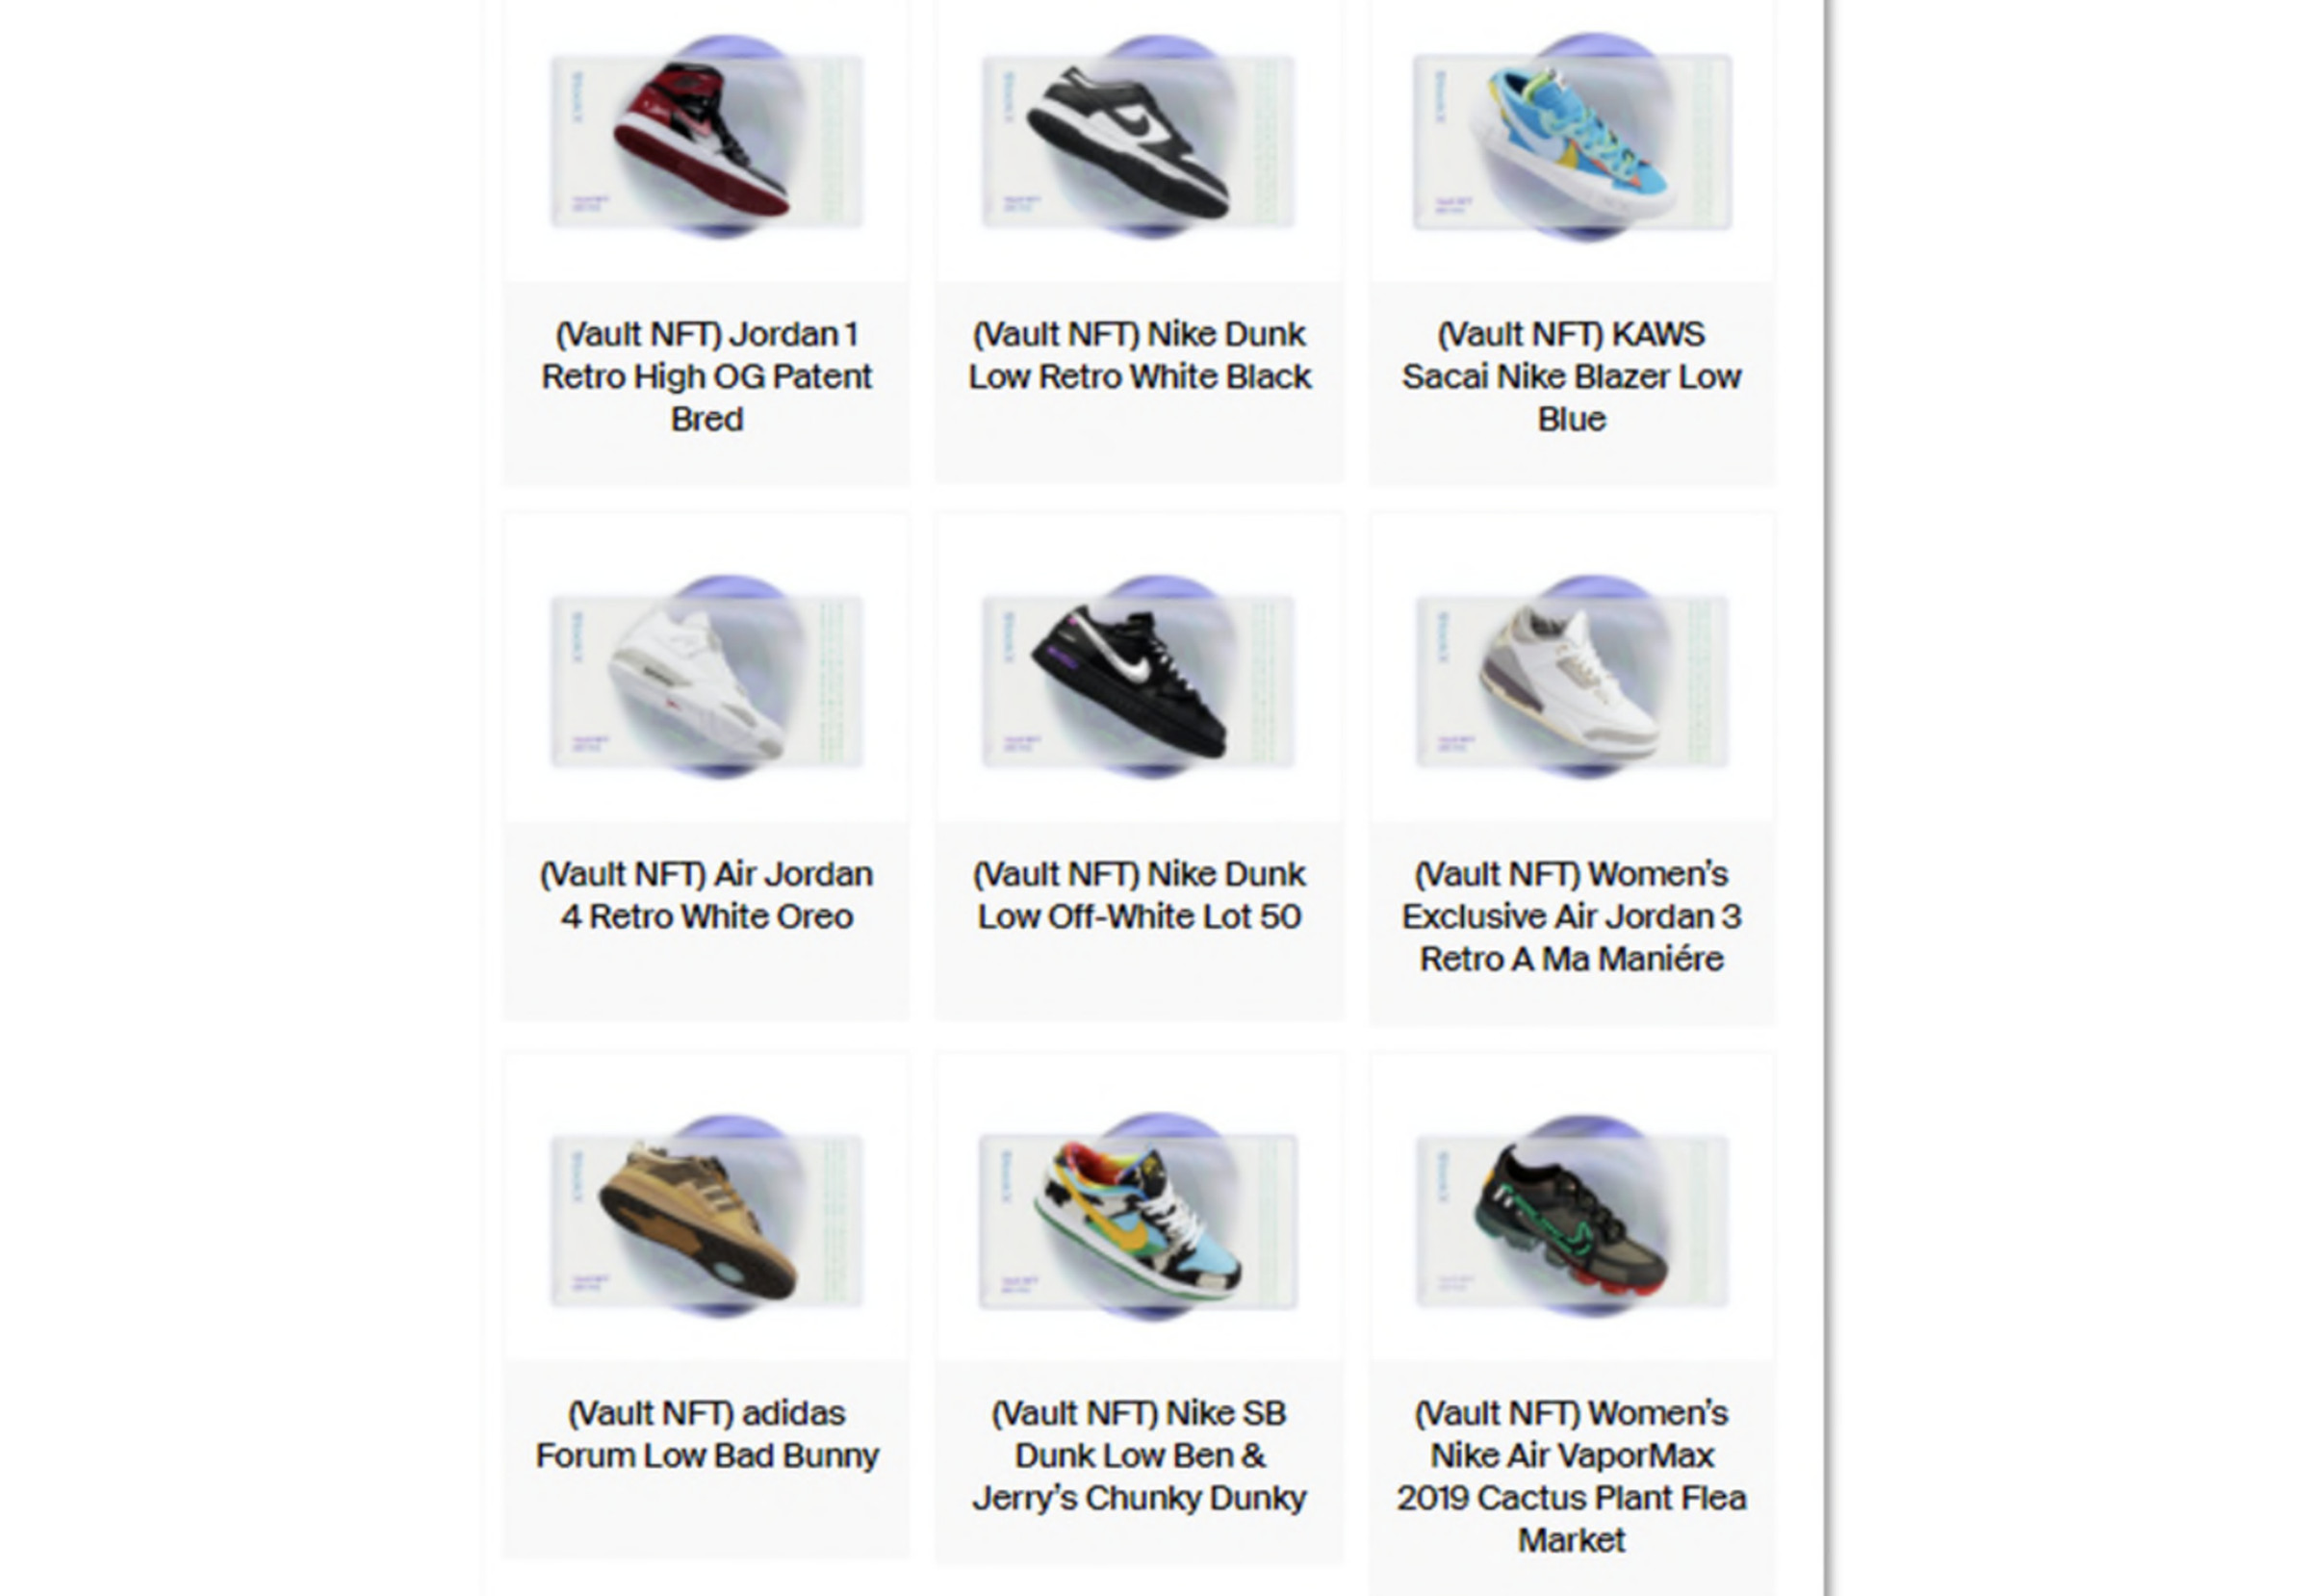 Vault NFT names and images from StockX.